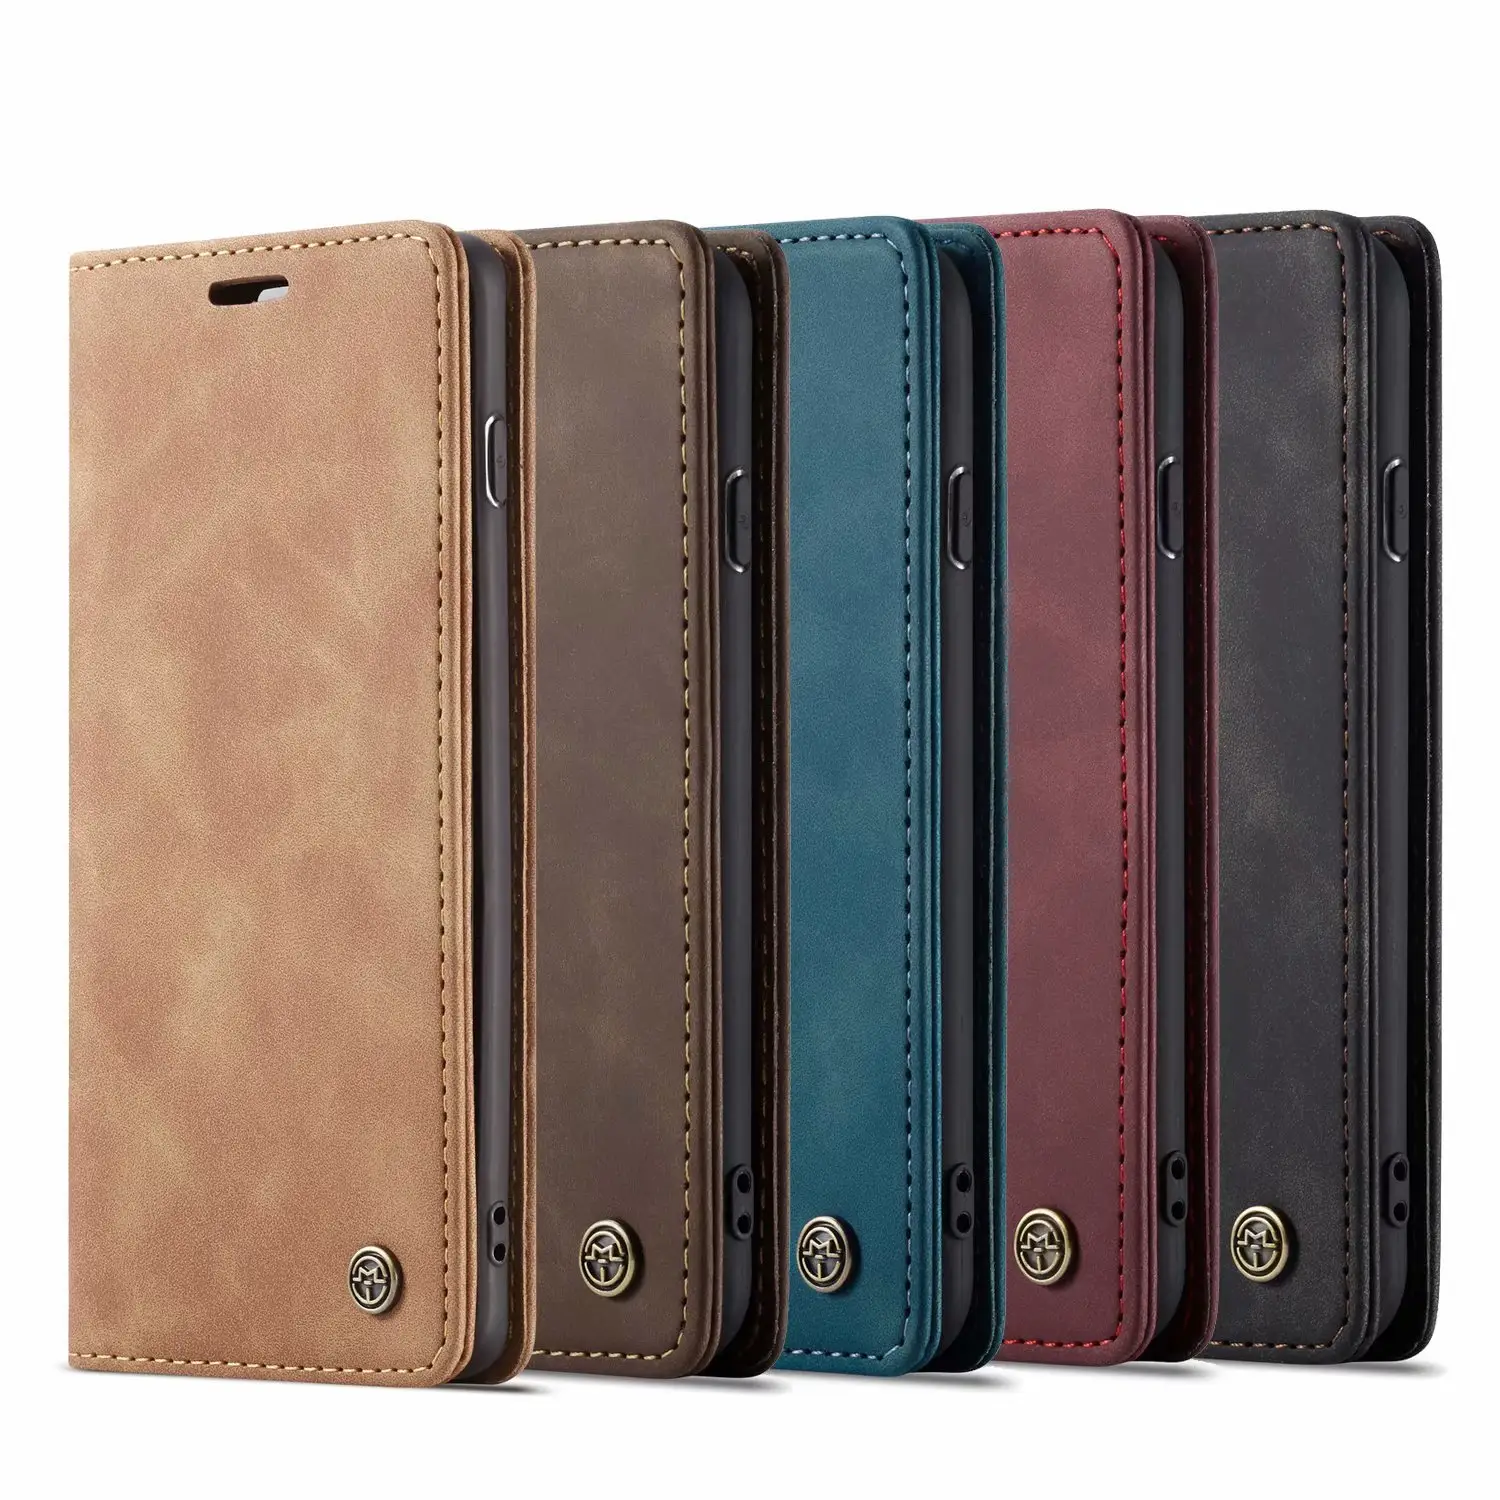 Boshiho PU leather durable phone case for Samsung note magnetic flip wallet case without buckle mobile phone pouch for iphone11